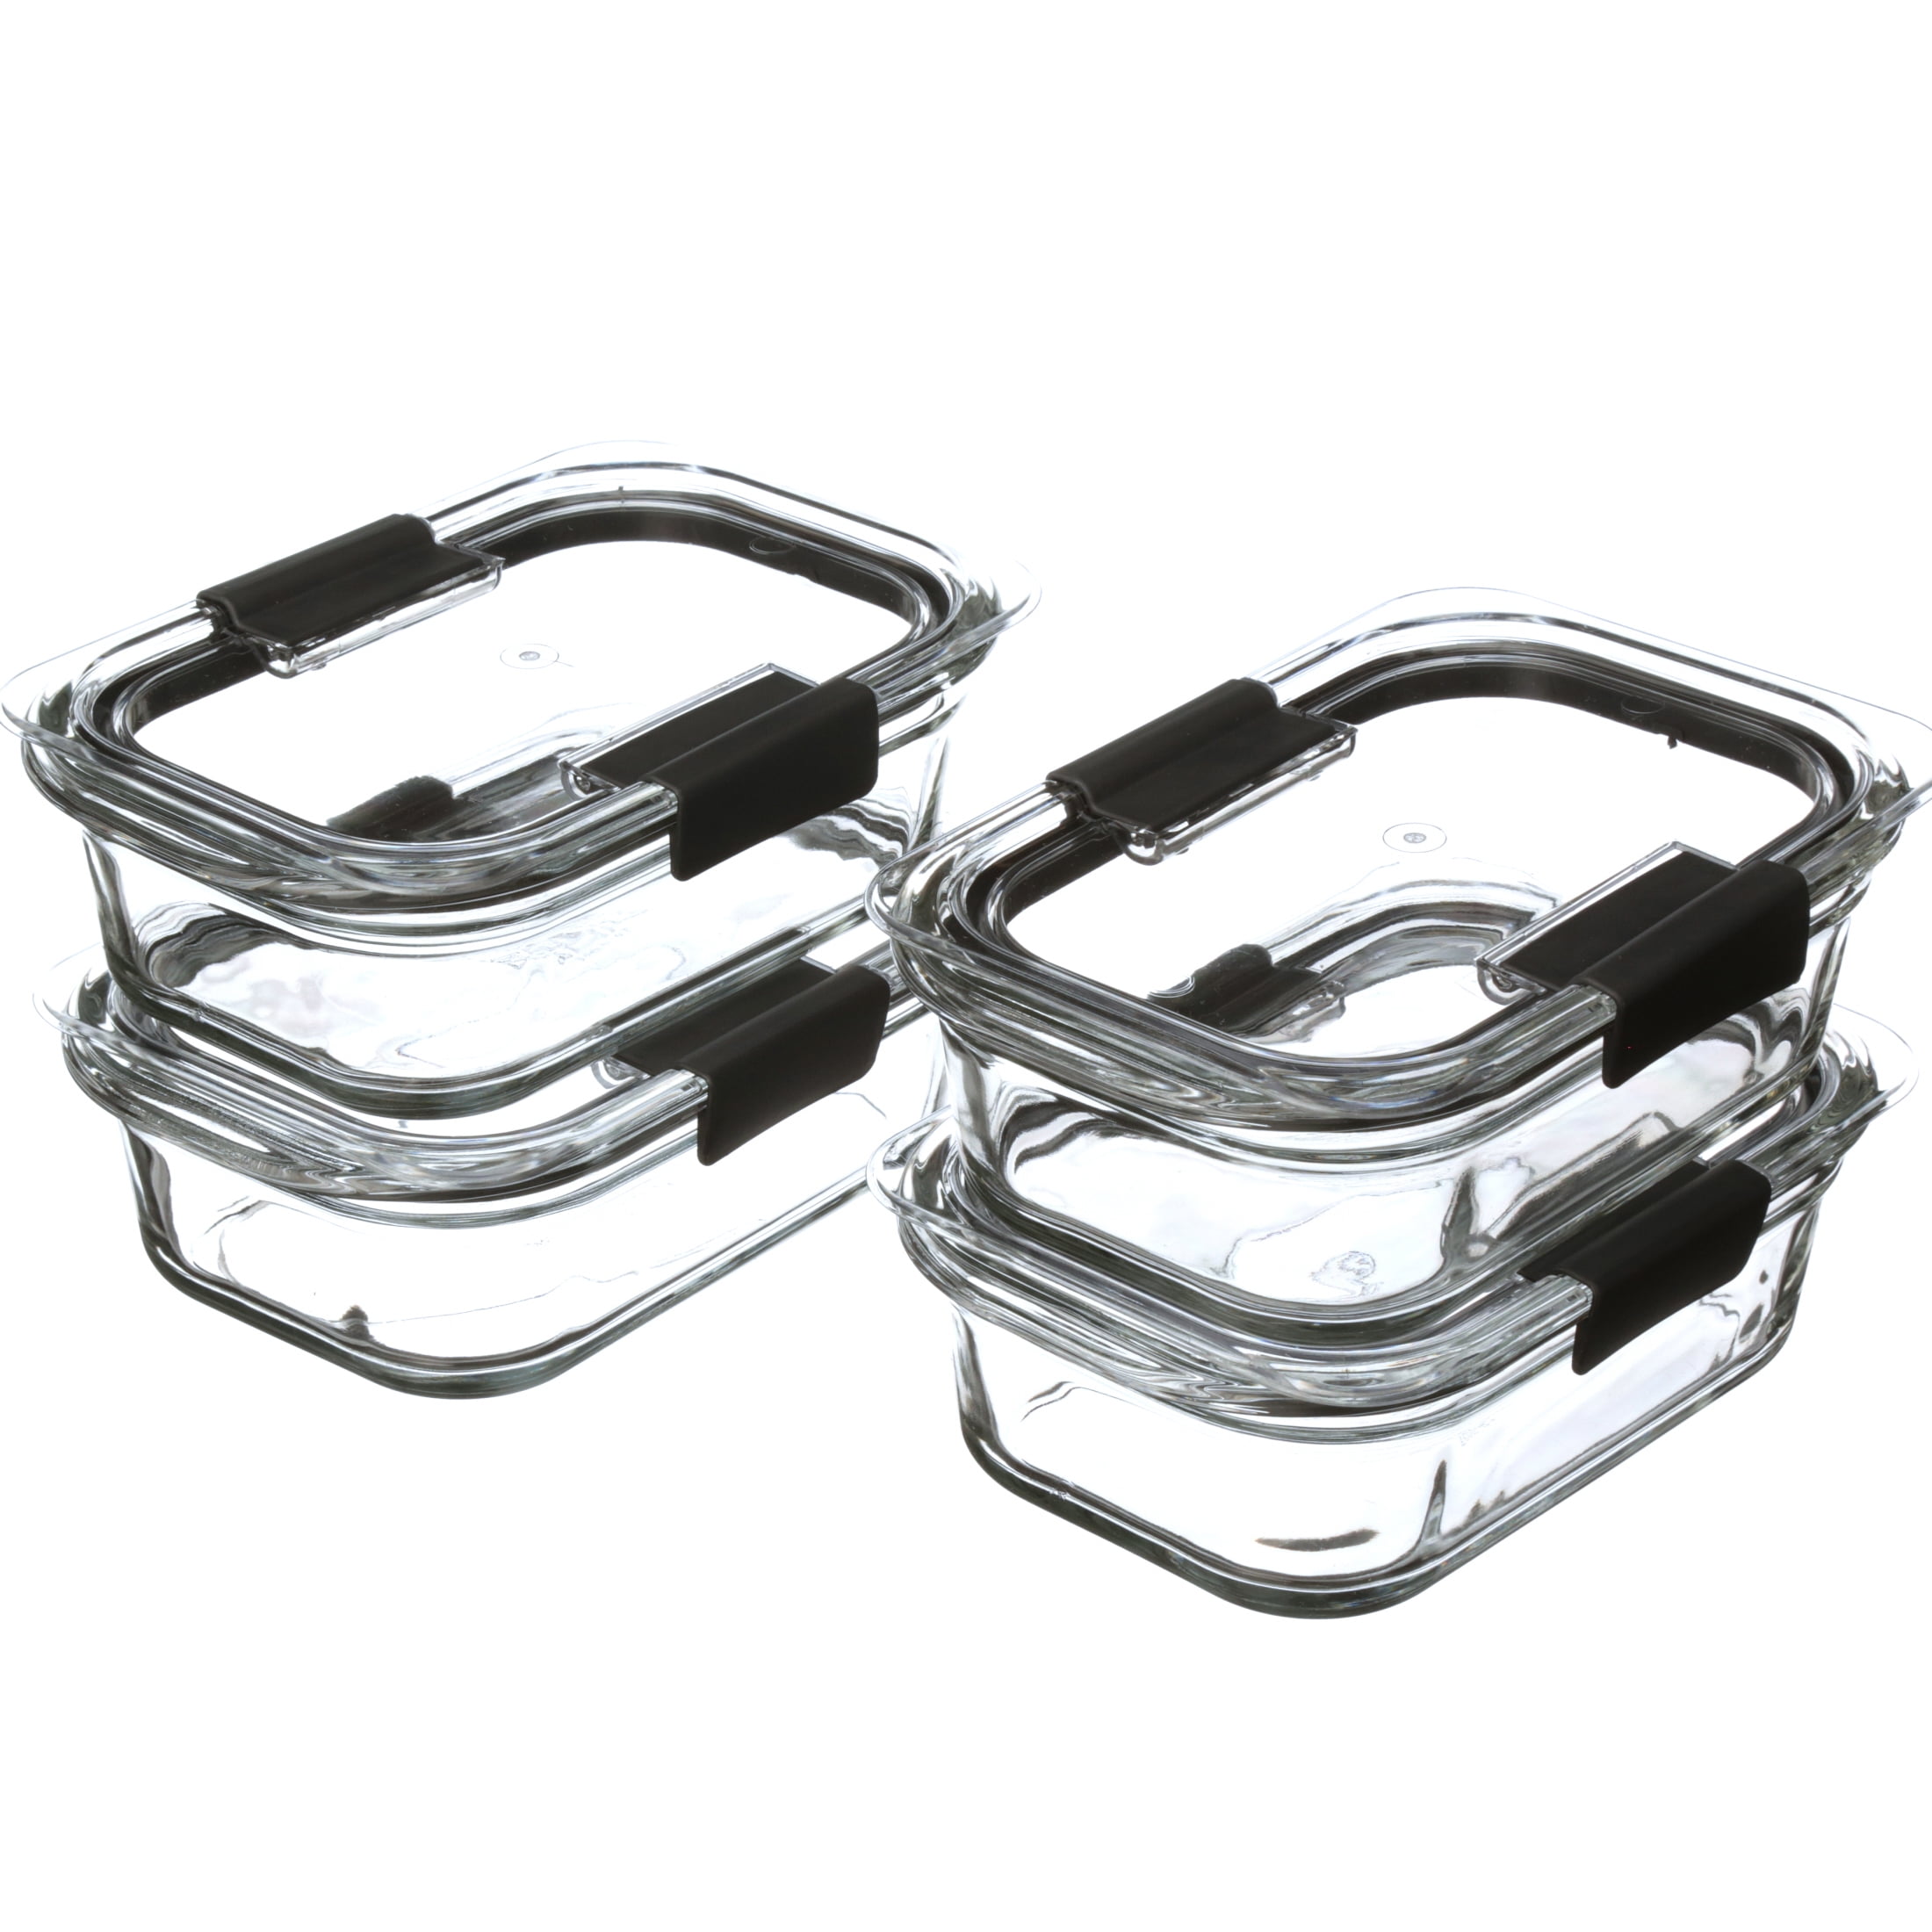 Rubbermaid® Brilliance Glass Storage Container, 3.2 c - Jay C Food